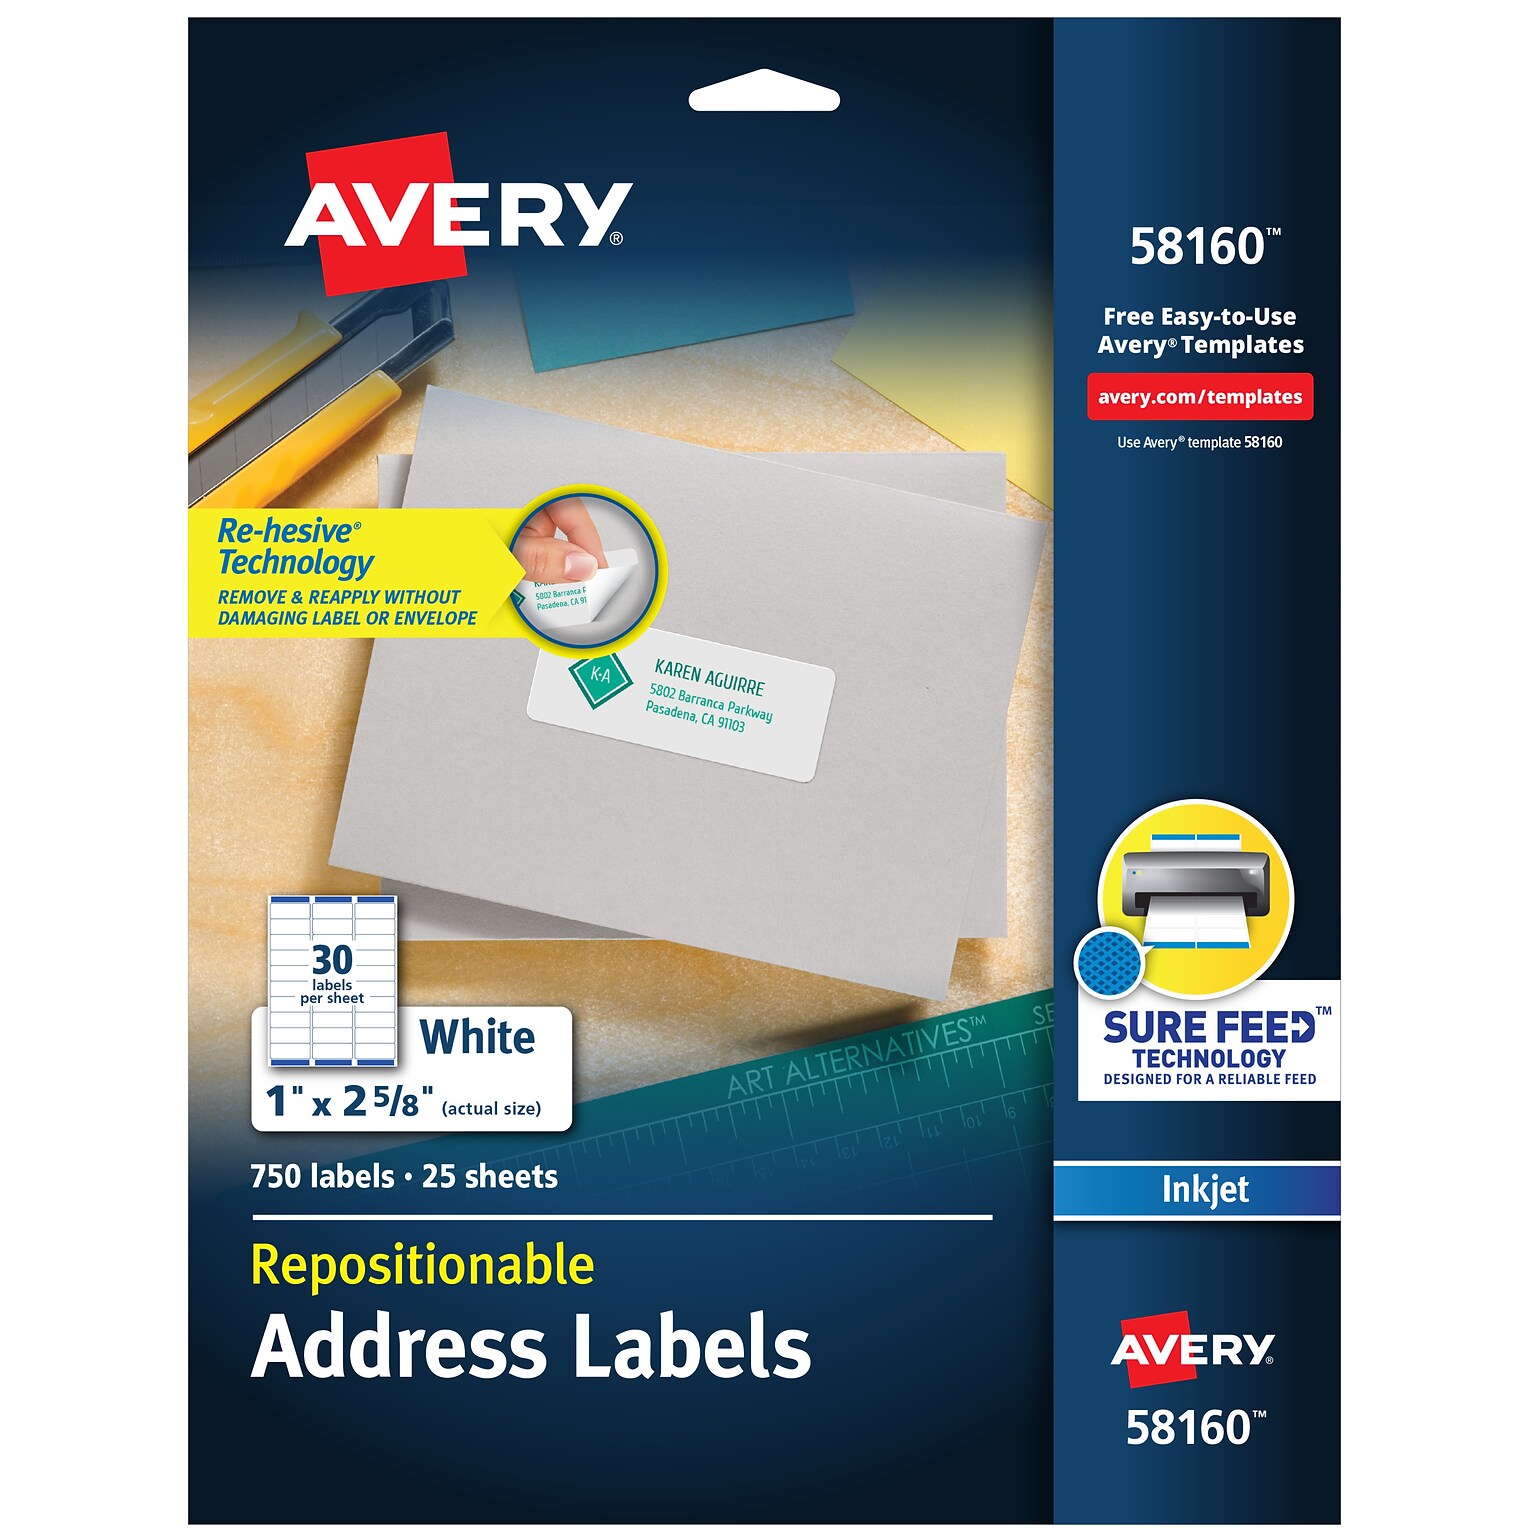 Avery Repositionable Inkjet Address Labels, 1 x 2-5/8, White, 30 Labels/Sheet, 25 Sheets/Pack (58160)